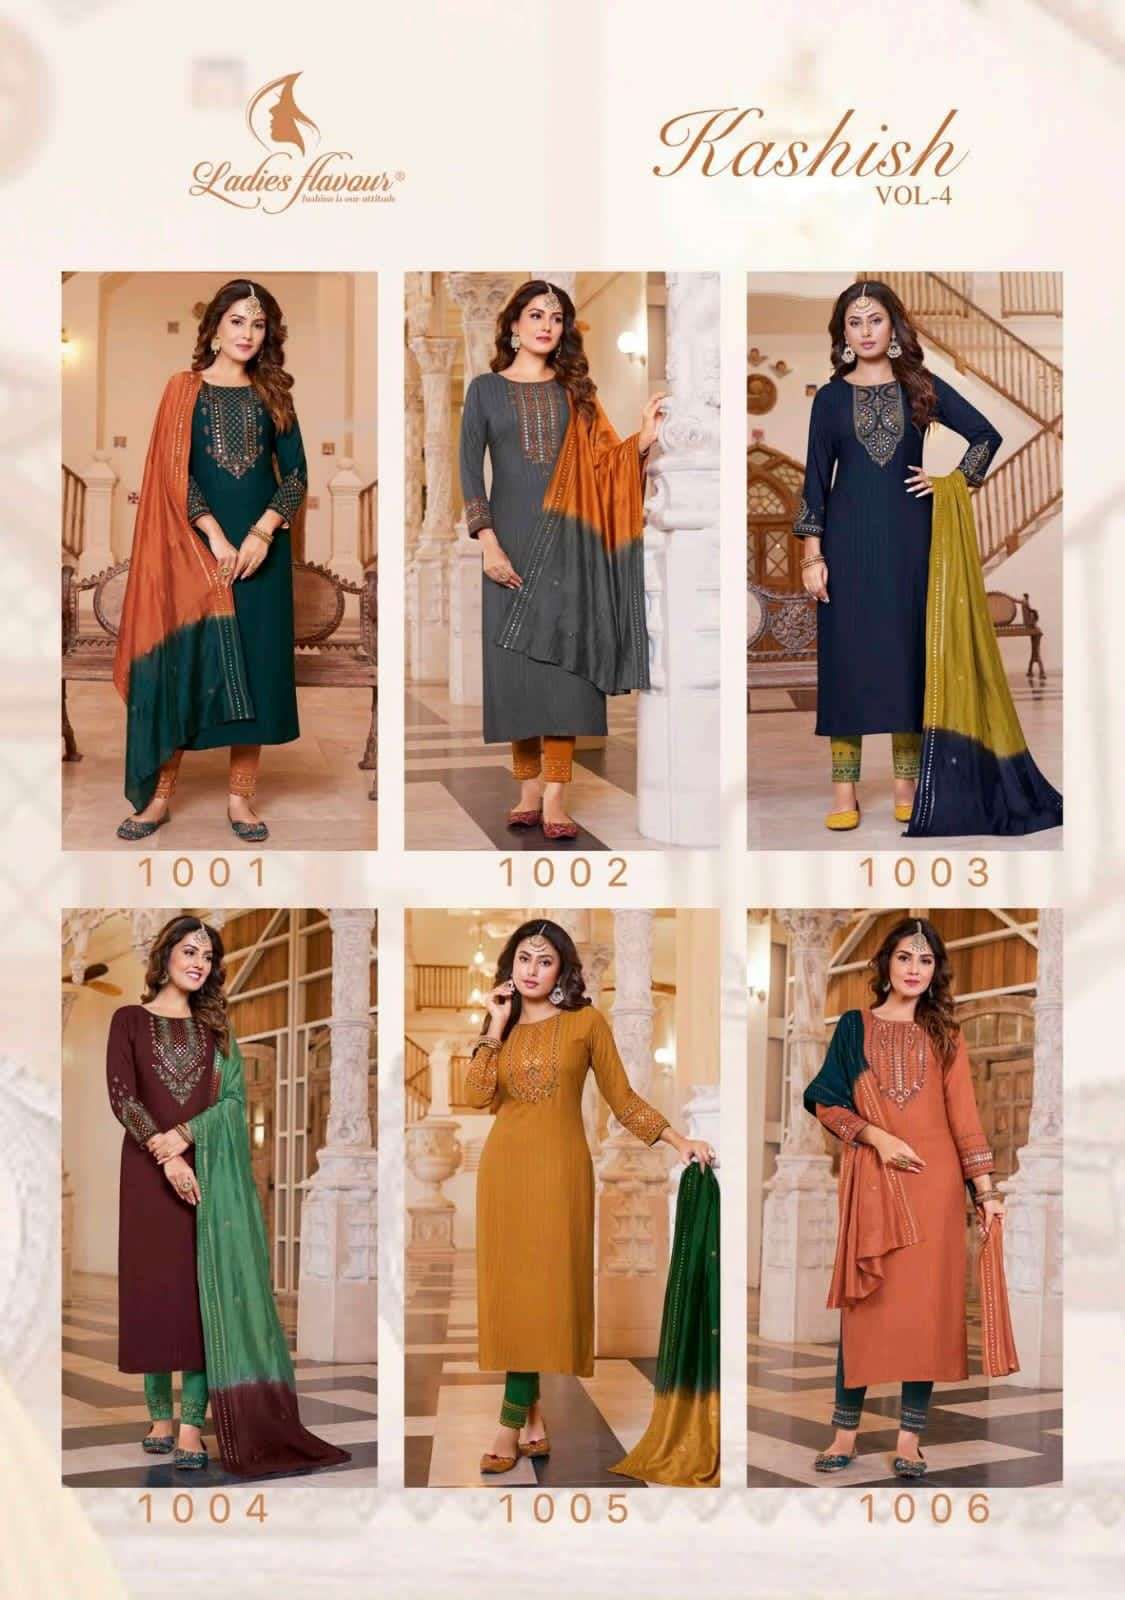 LADIES FLAVOUR PRESENTS KASHISH VOL 4 PURE RAYON EMBROIDERY WHOLESALE READYMADE COLLECTION